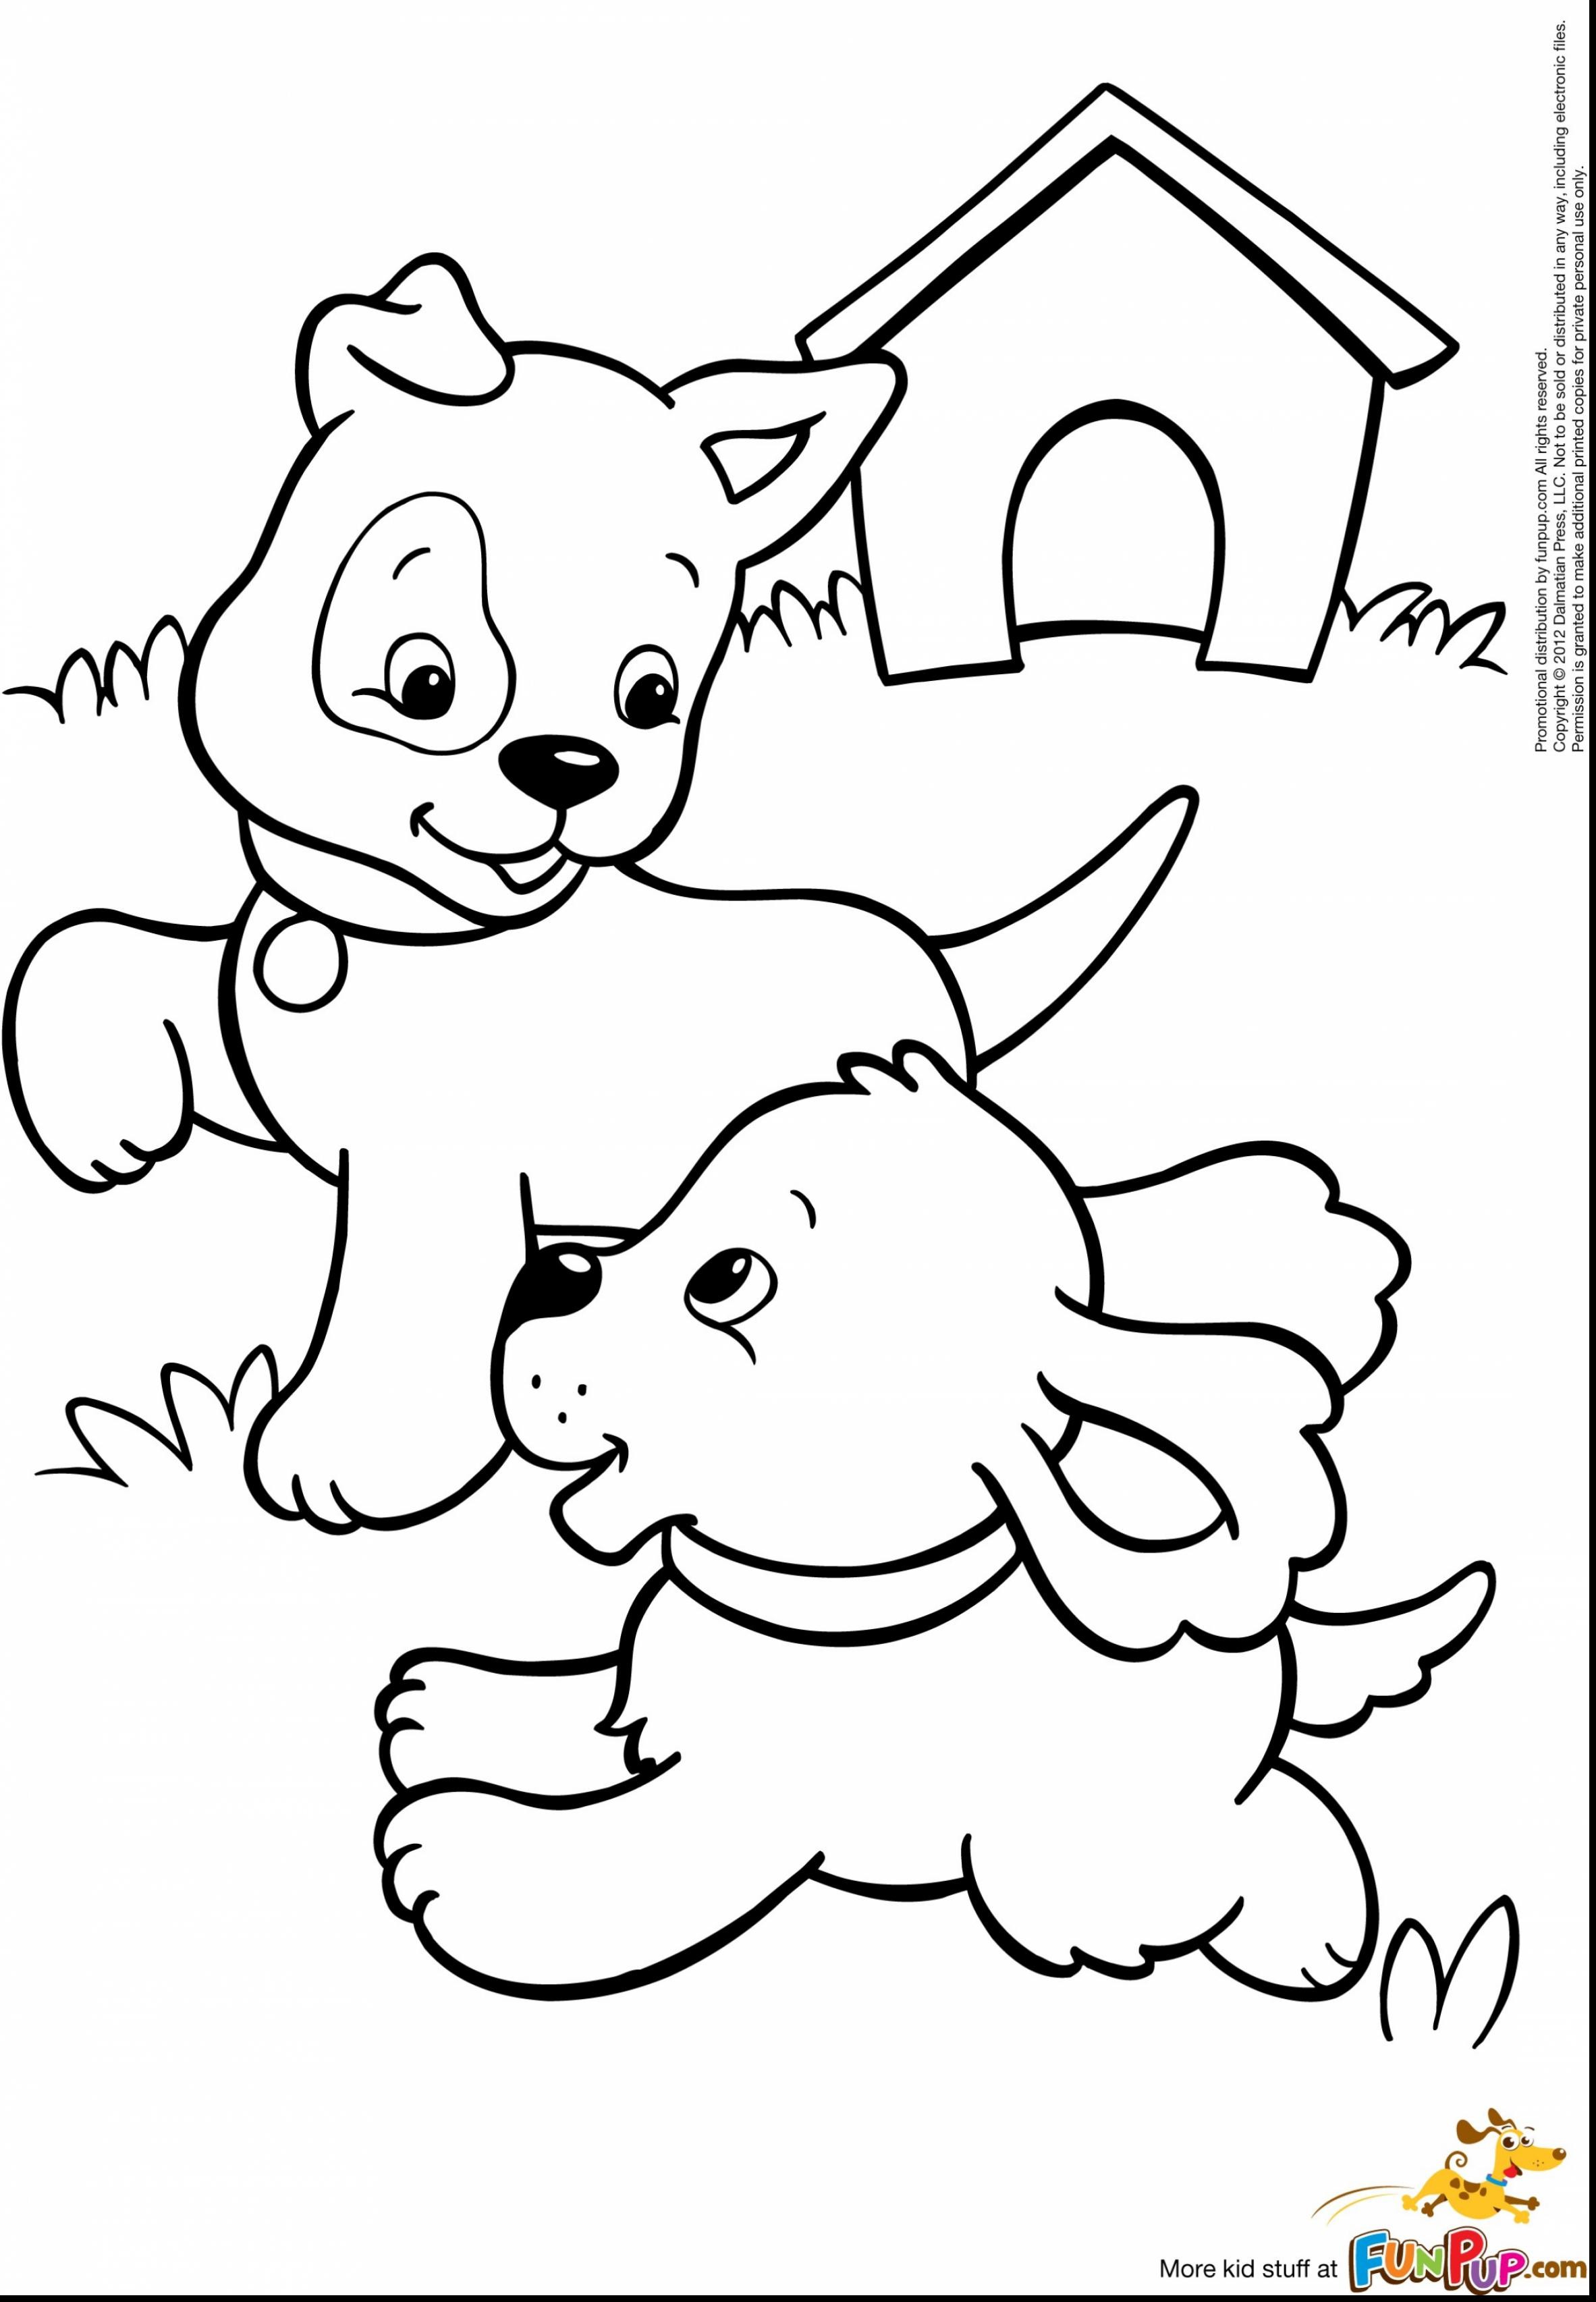 Exciting Cute Puppies Coloring Pages To Print Puppy 11